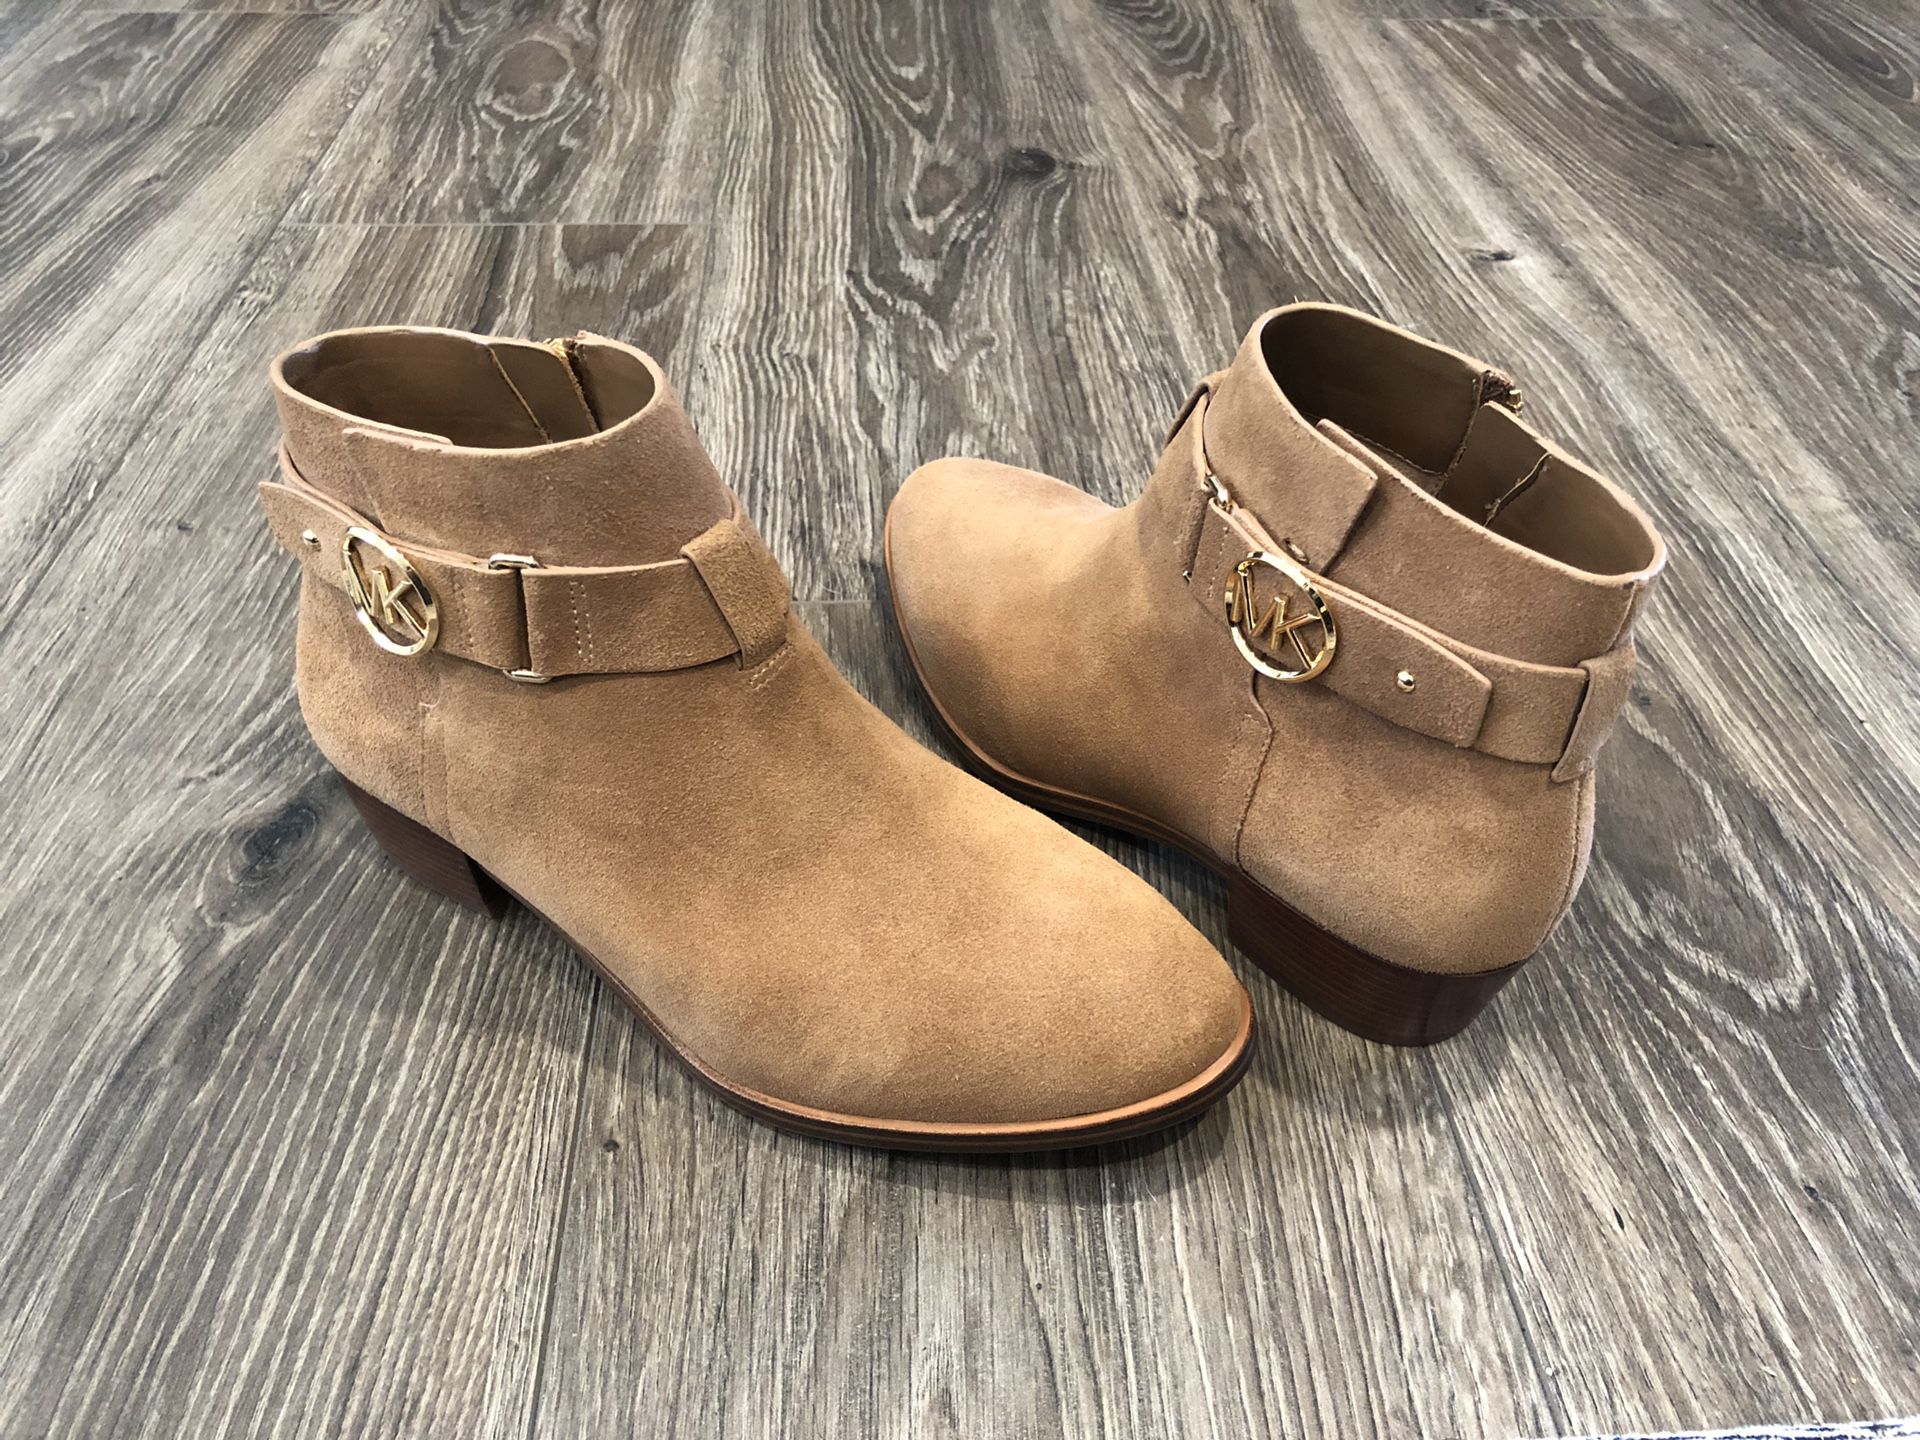 BRAND NEW! Michael Kors Harland Suede Boots! 6.5